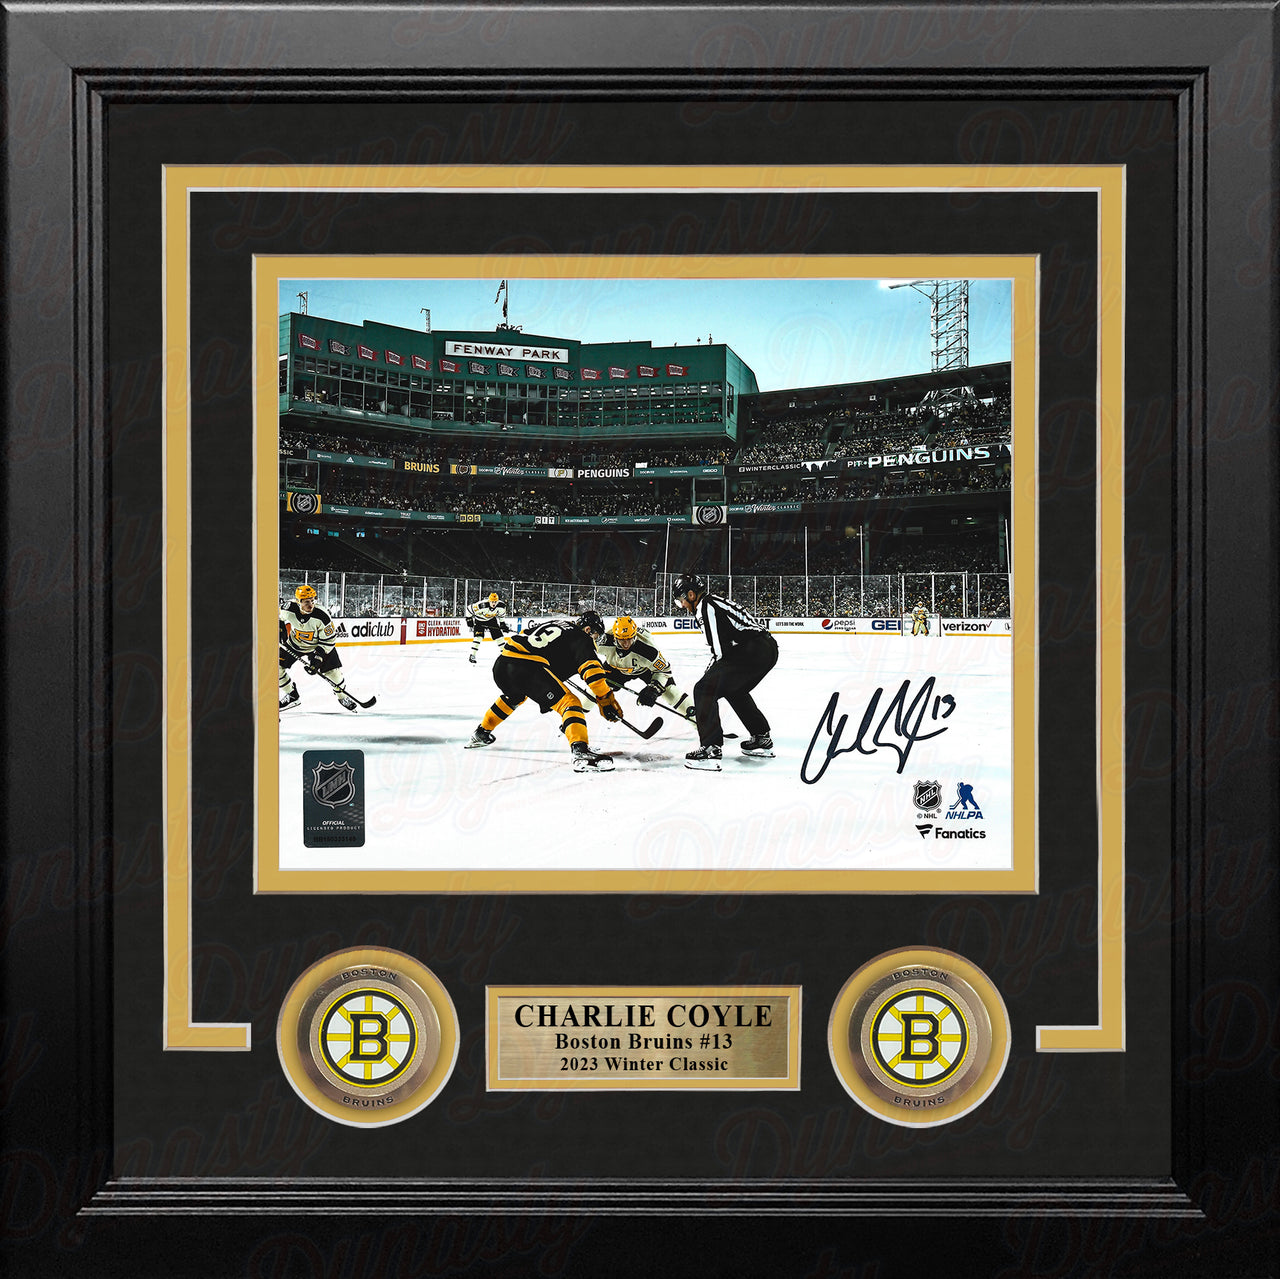 Charlie Coyle 2023 Winter Classic Face-Off Boston Bruins Hockey Photo -  Dynasty Sports & Framing